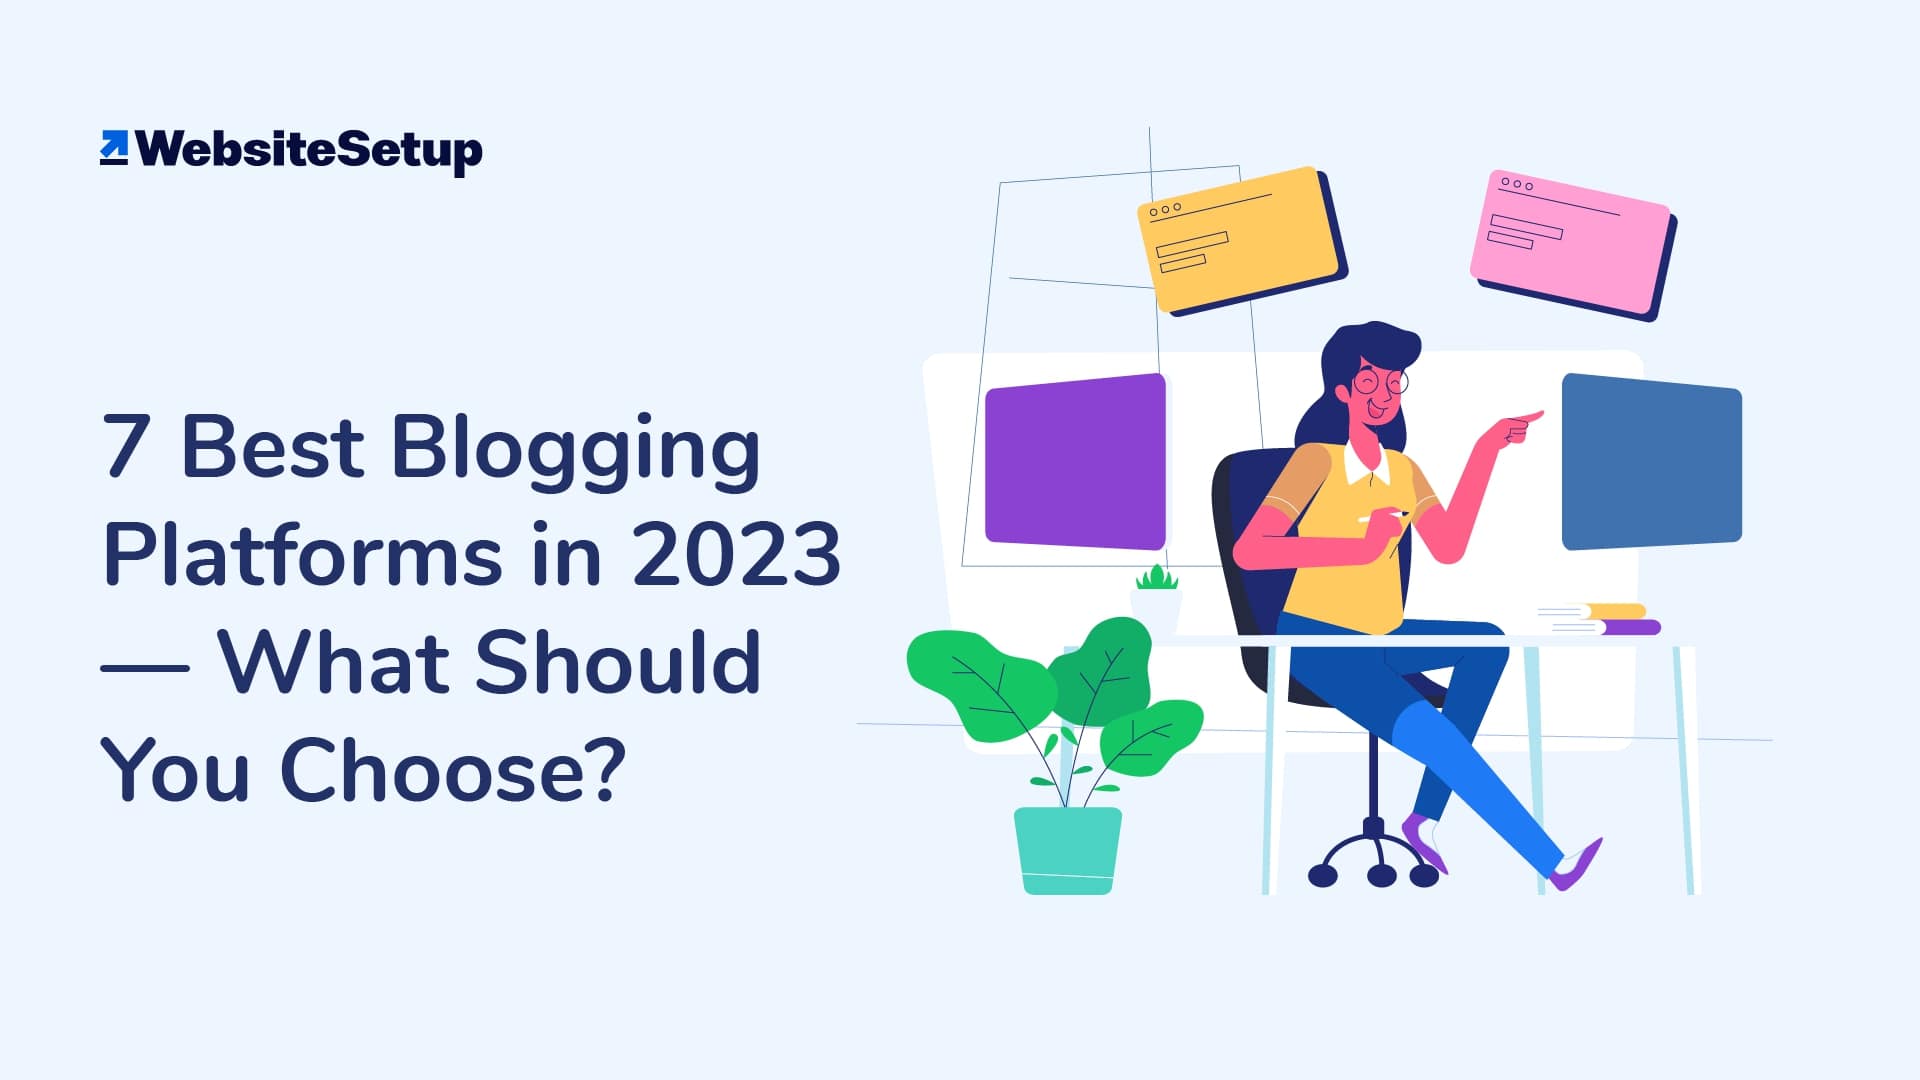 The 5 best blog sites in 2023